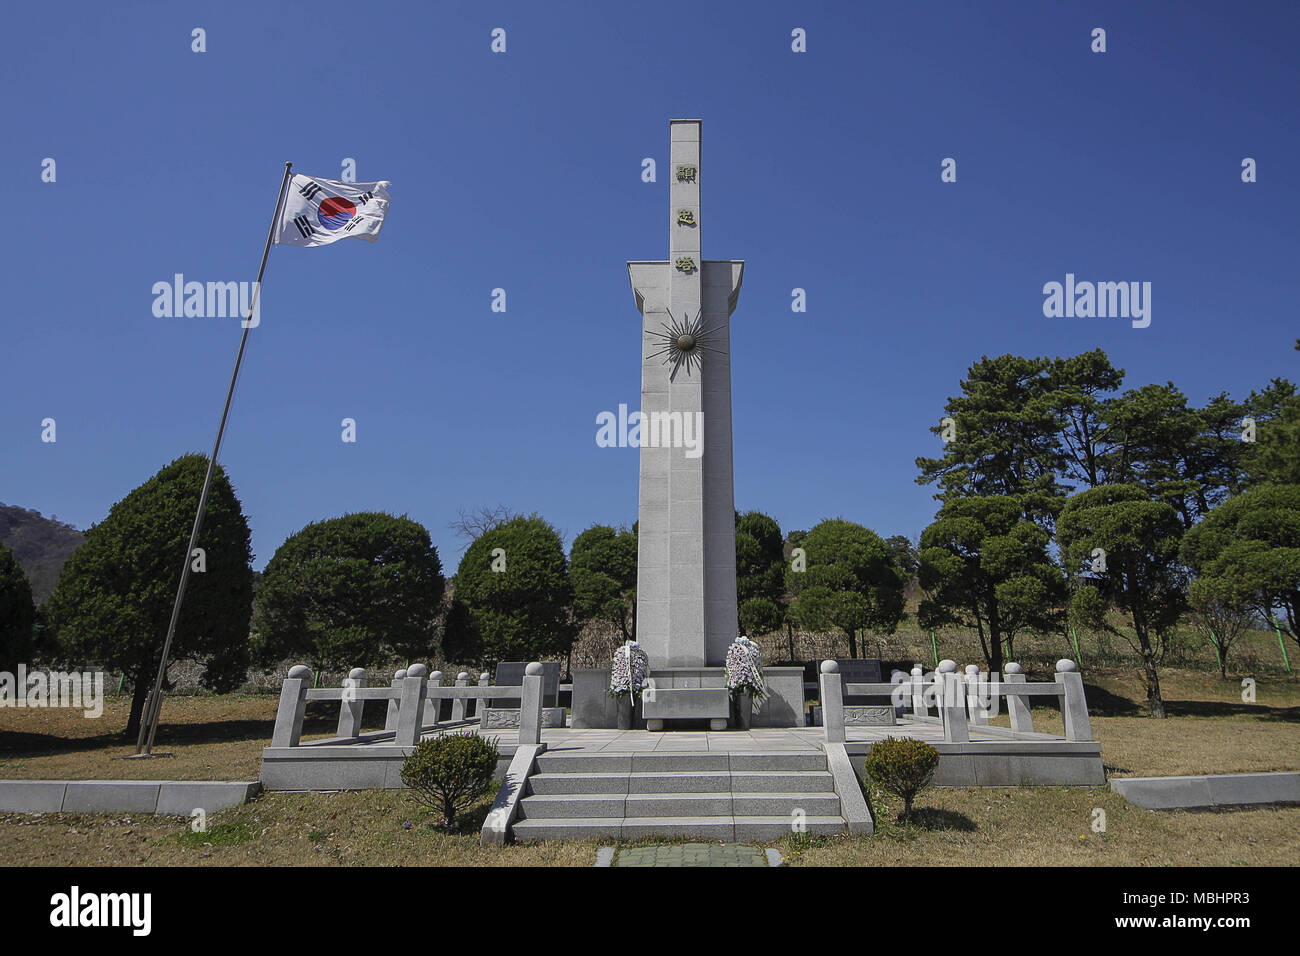 Yeoncheon, GYEONGGI, SOUTH KOREA. 11th Apr, 2018. April 11, 2018-Goyang, South Korea-A View of Korean War veterans memories monument. To Admire the great achievement the 17th Army regiment troops made in the Yeoncheon District battles from December 17, 1950 to March 15, 1951. And to honor the nation's freedom and peace. Credit: Ryu Seung-Il/ZUMA Wire/Alamy Live News Stock Photo